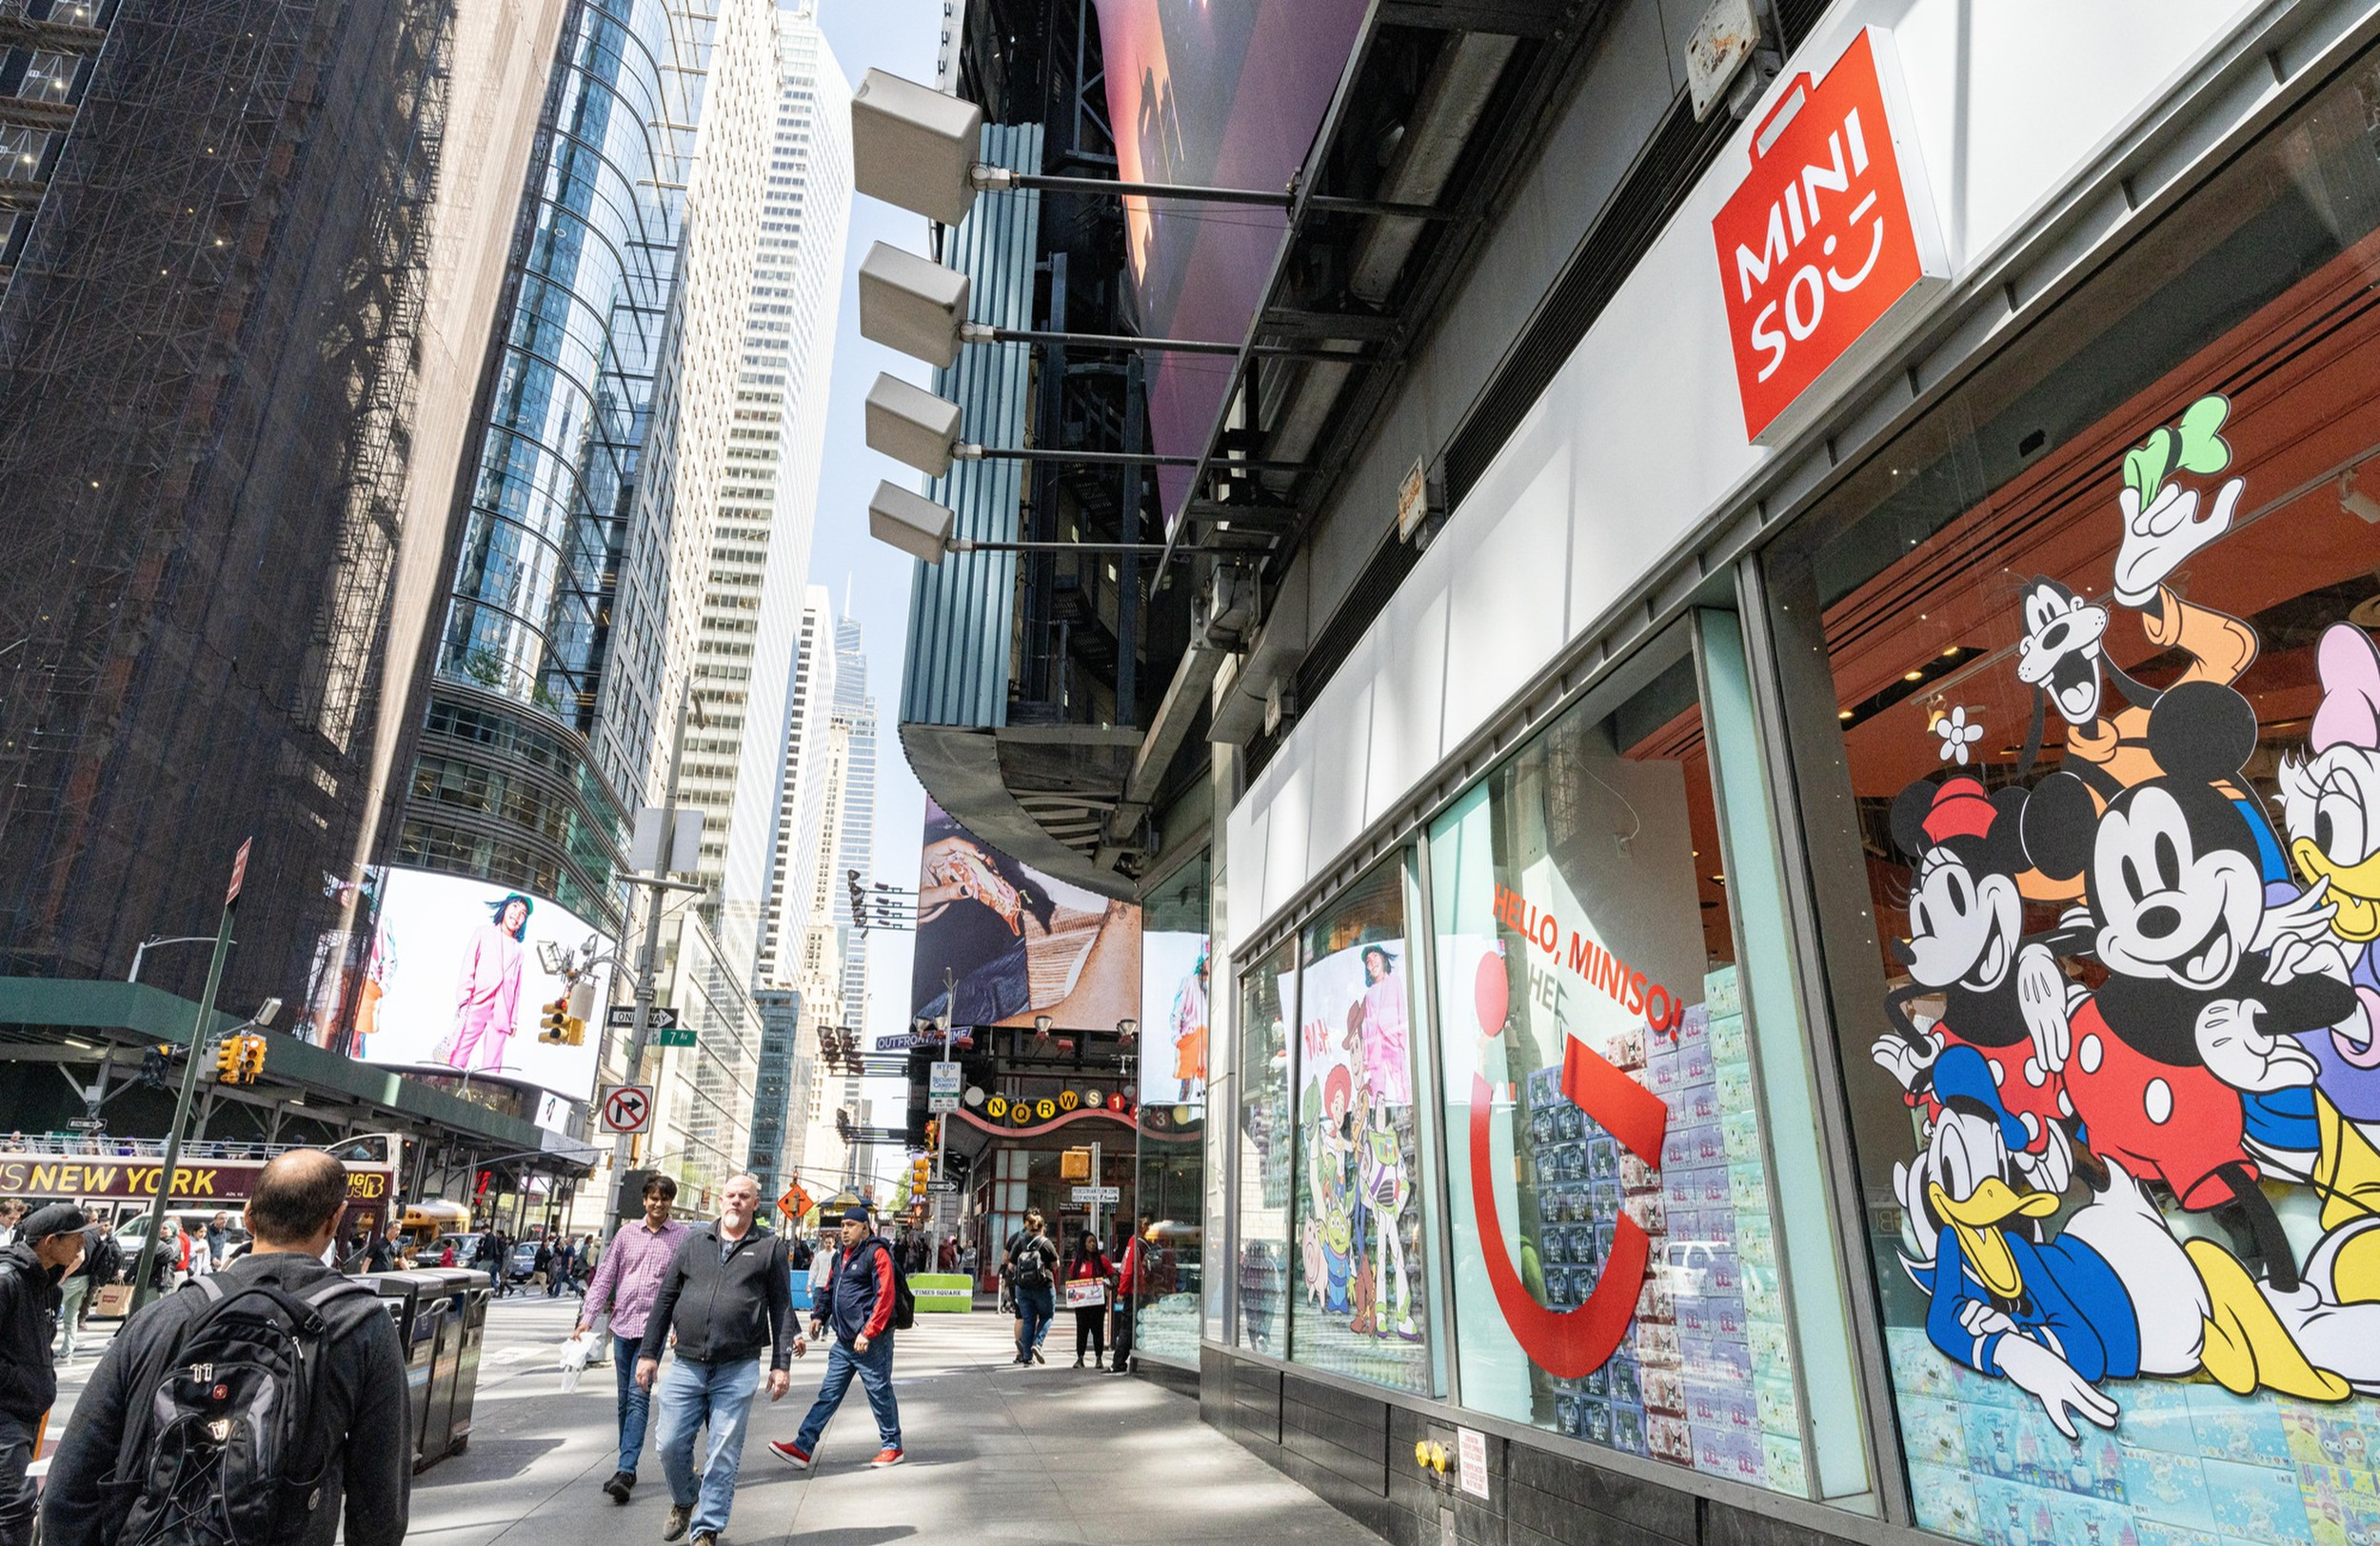 Miniso’s shop at Times Square in New York City. Photo: Handout